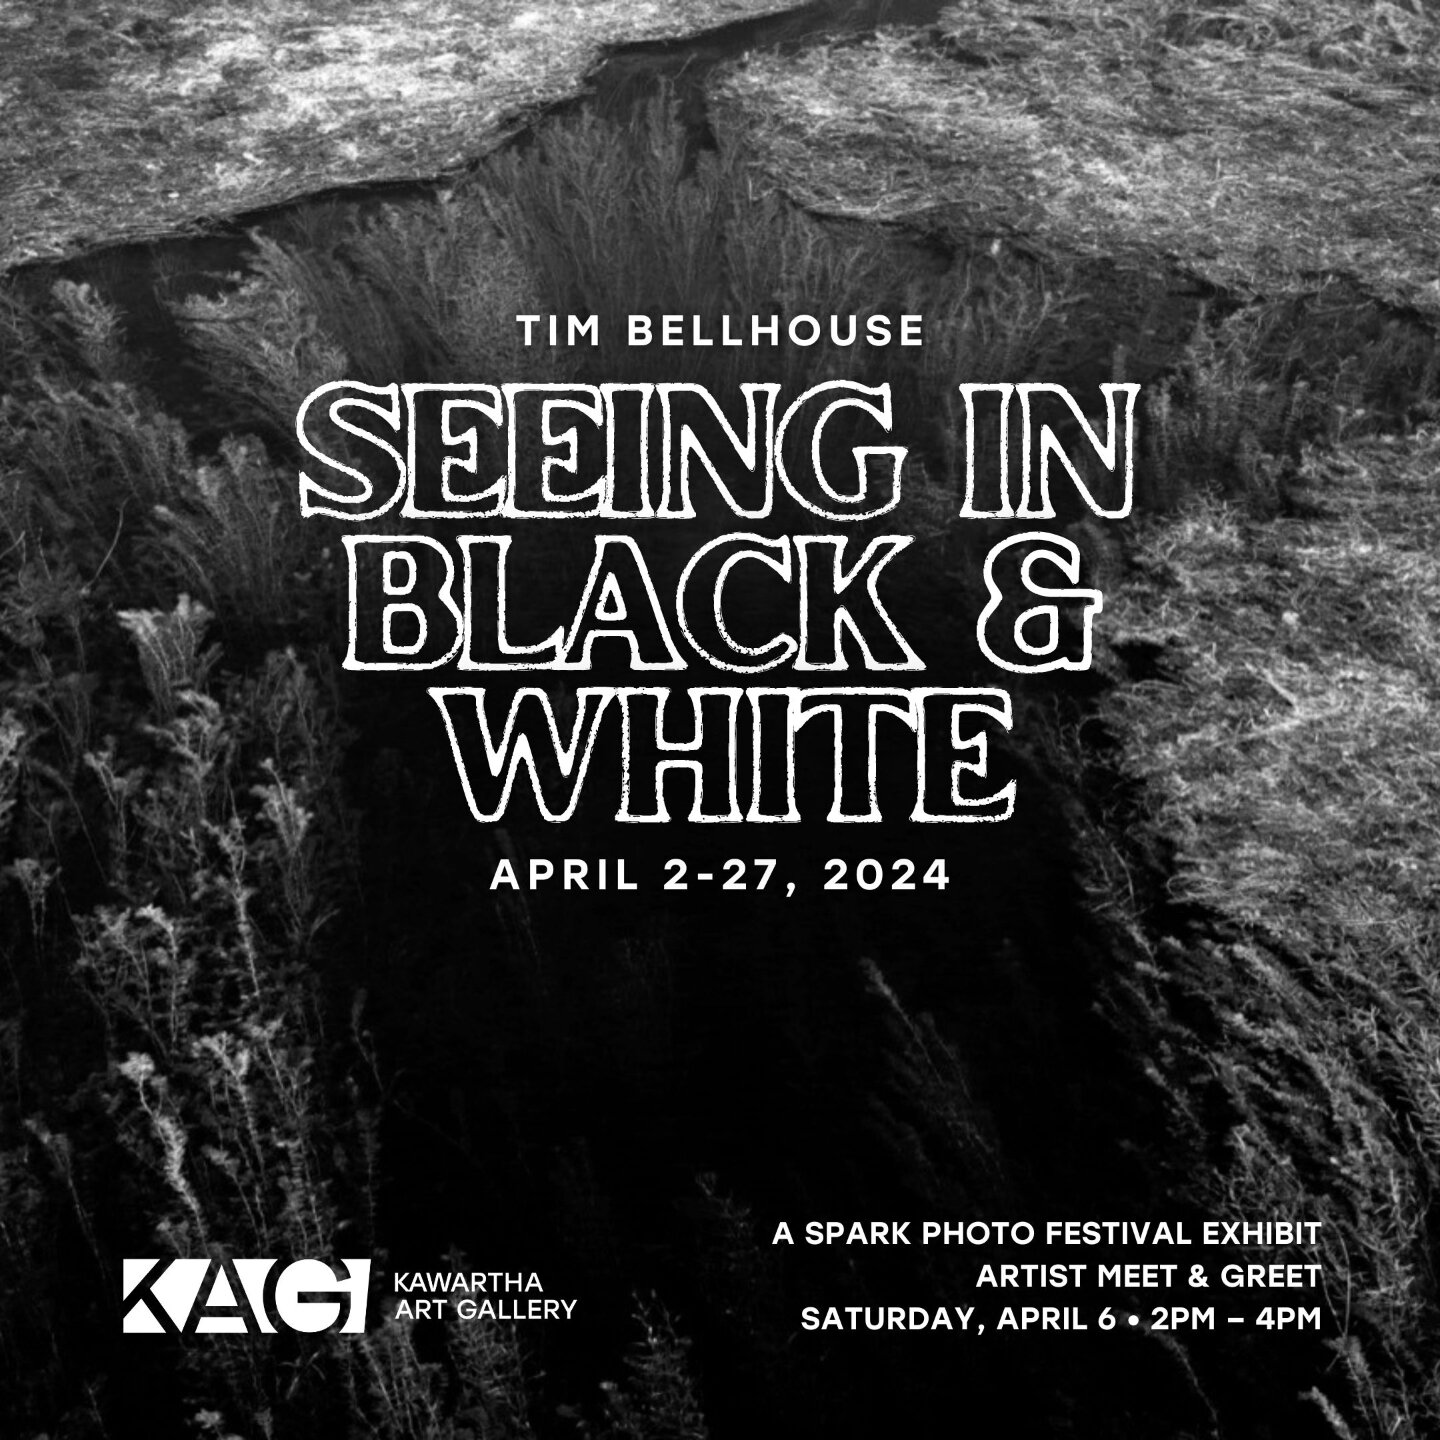 Come visit us next week for the opening of Tim Bellhouse's Seeing in Black &amp; White! ⚫️⚪️

This exhibit is part of SPARK Photo Festival, which runs for the whole month of April across the Kawartha Lakes, Peterborough and Northumberland.

You can r